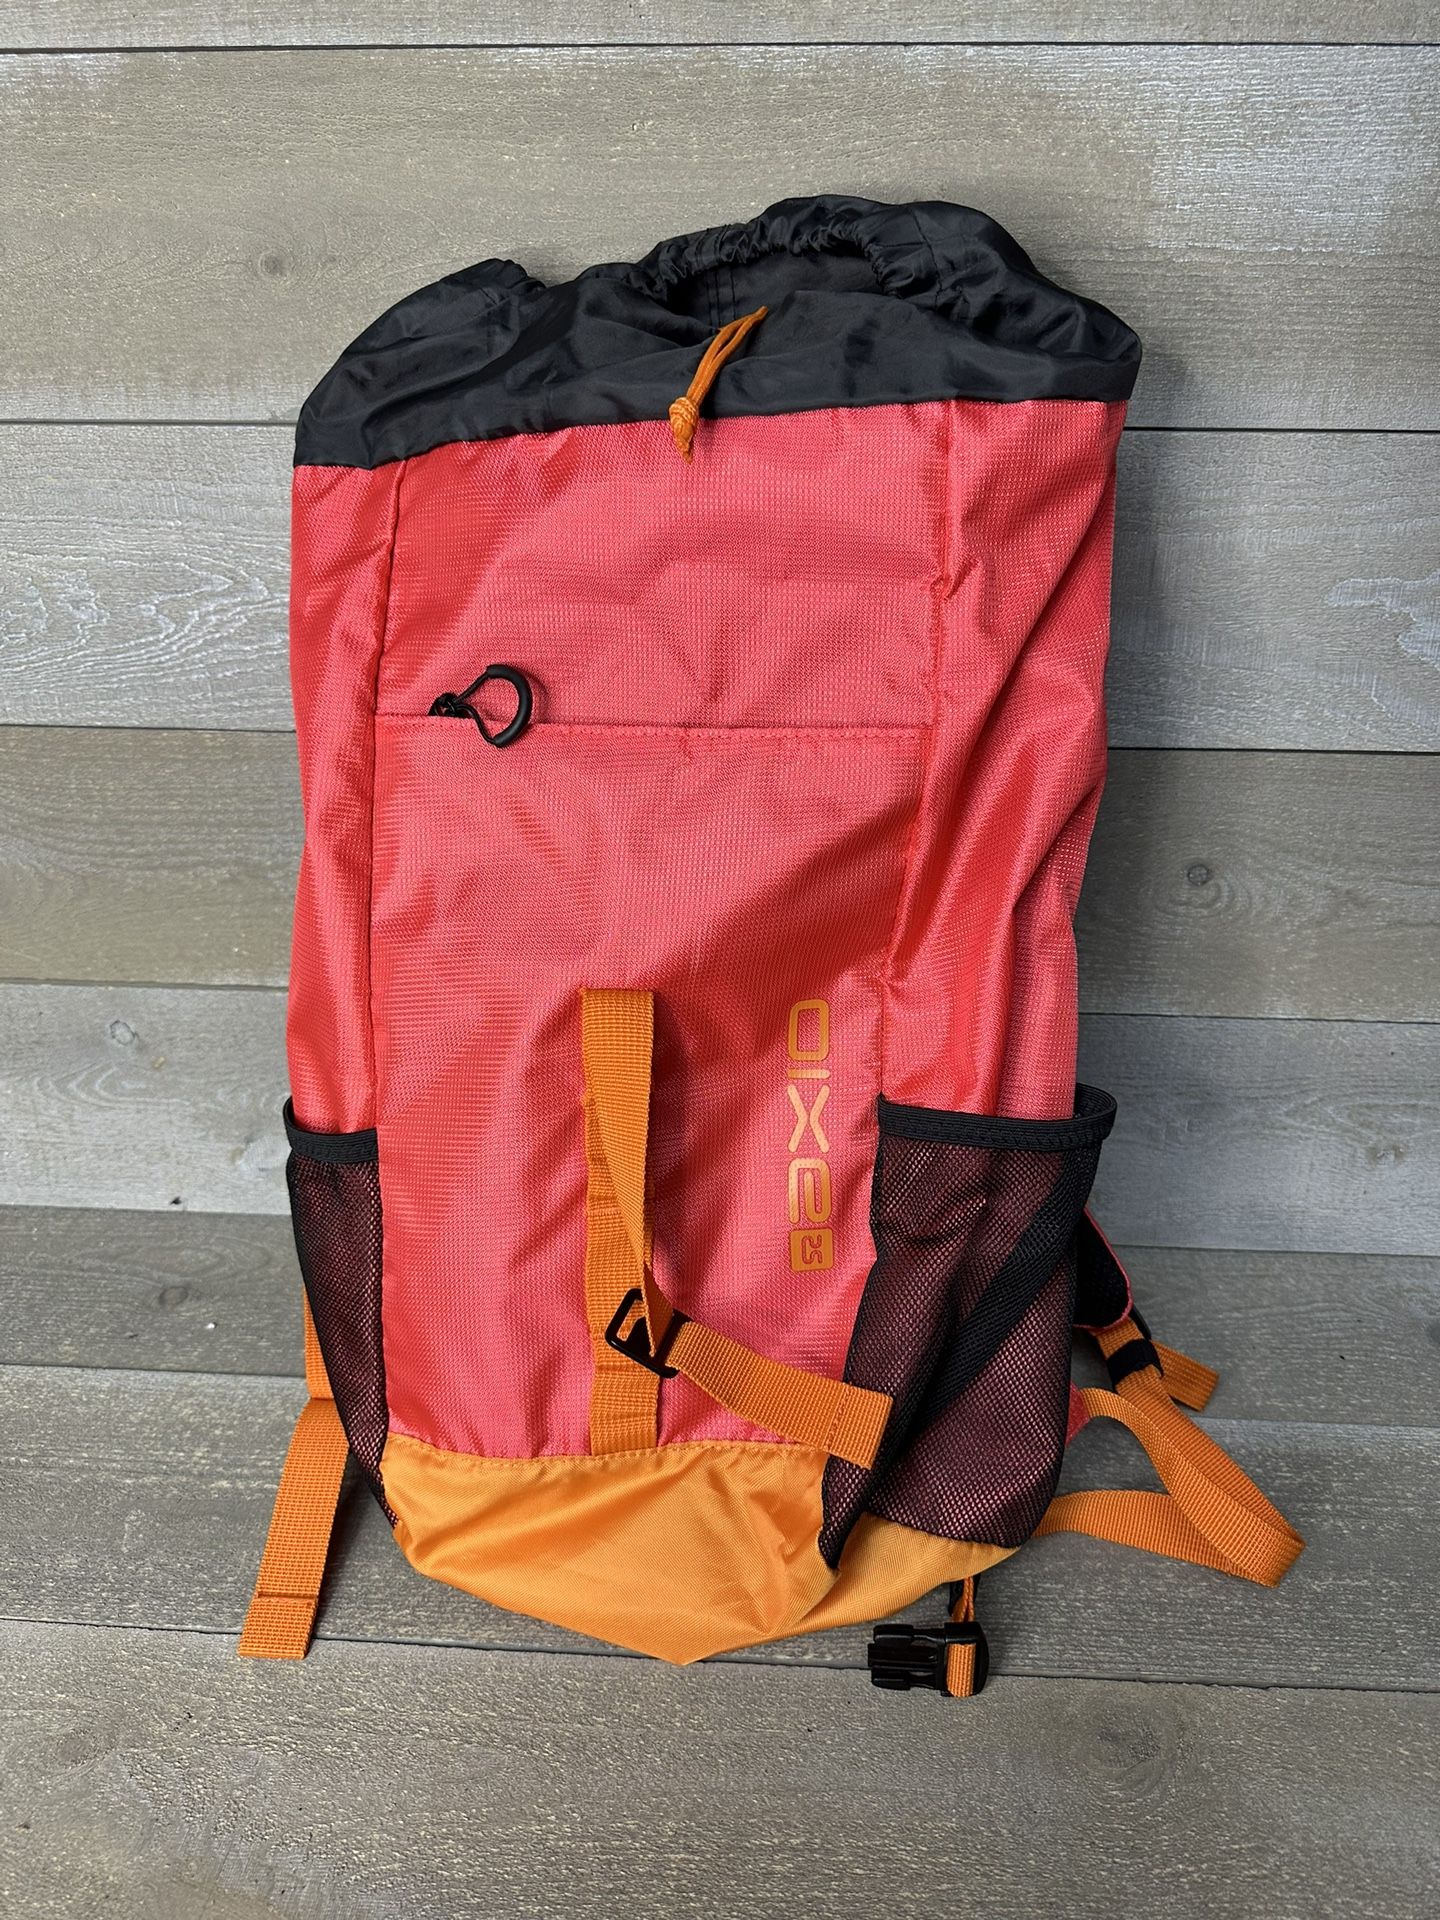 Axio 25L Soft Hiking Backpack Orange Pink Black With Back Support 